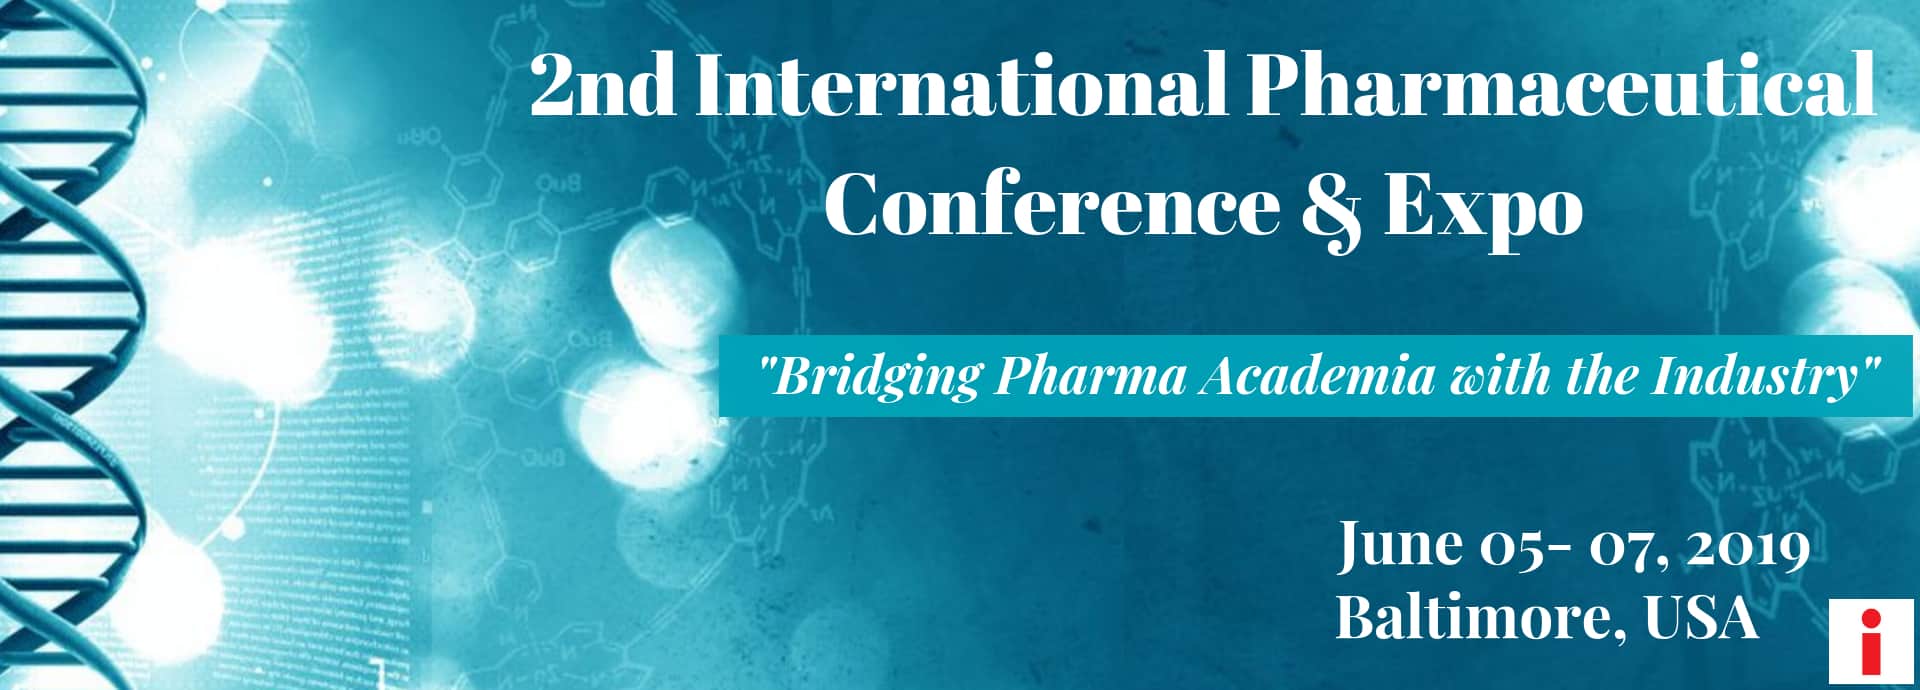 2nd International Pharmaceutical Conference and Expo